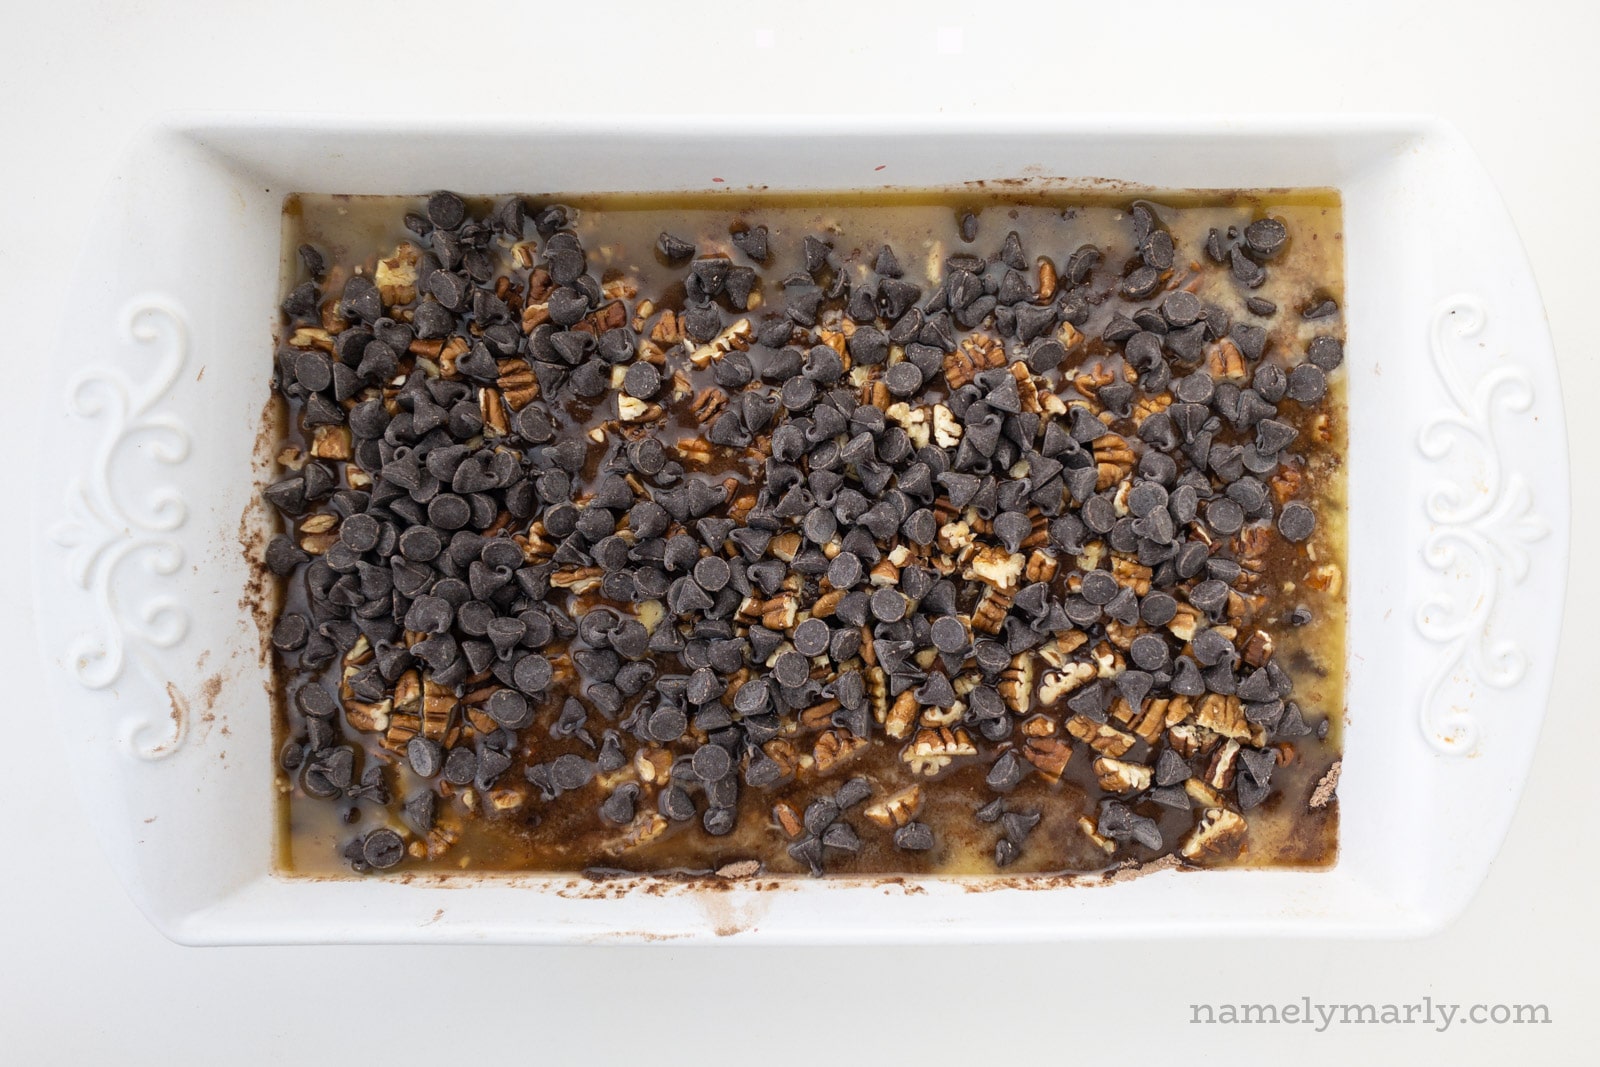 Chocolate chips have been added to this unbaked chocolate dump cake.